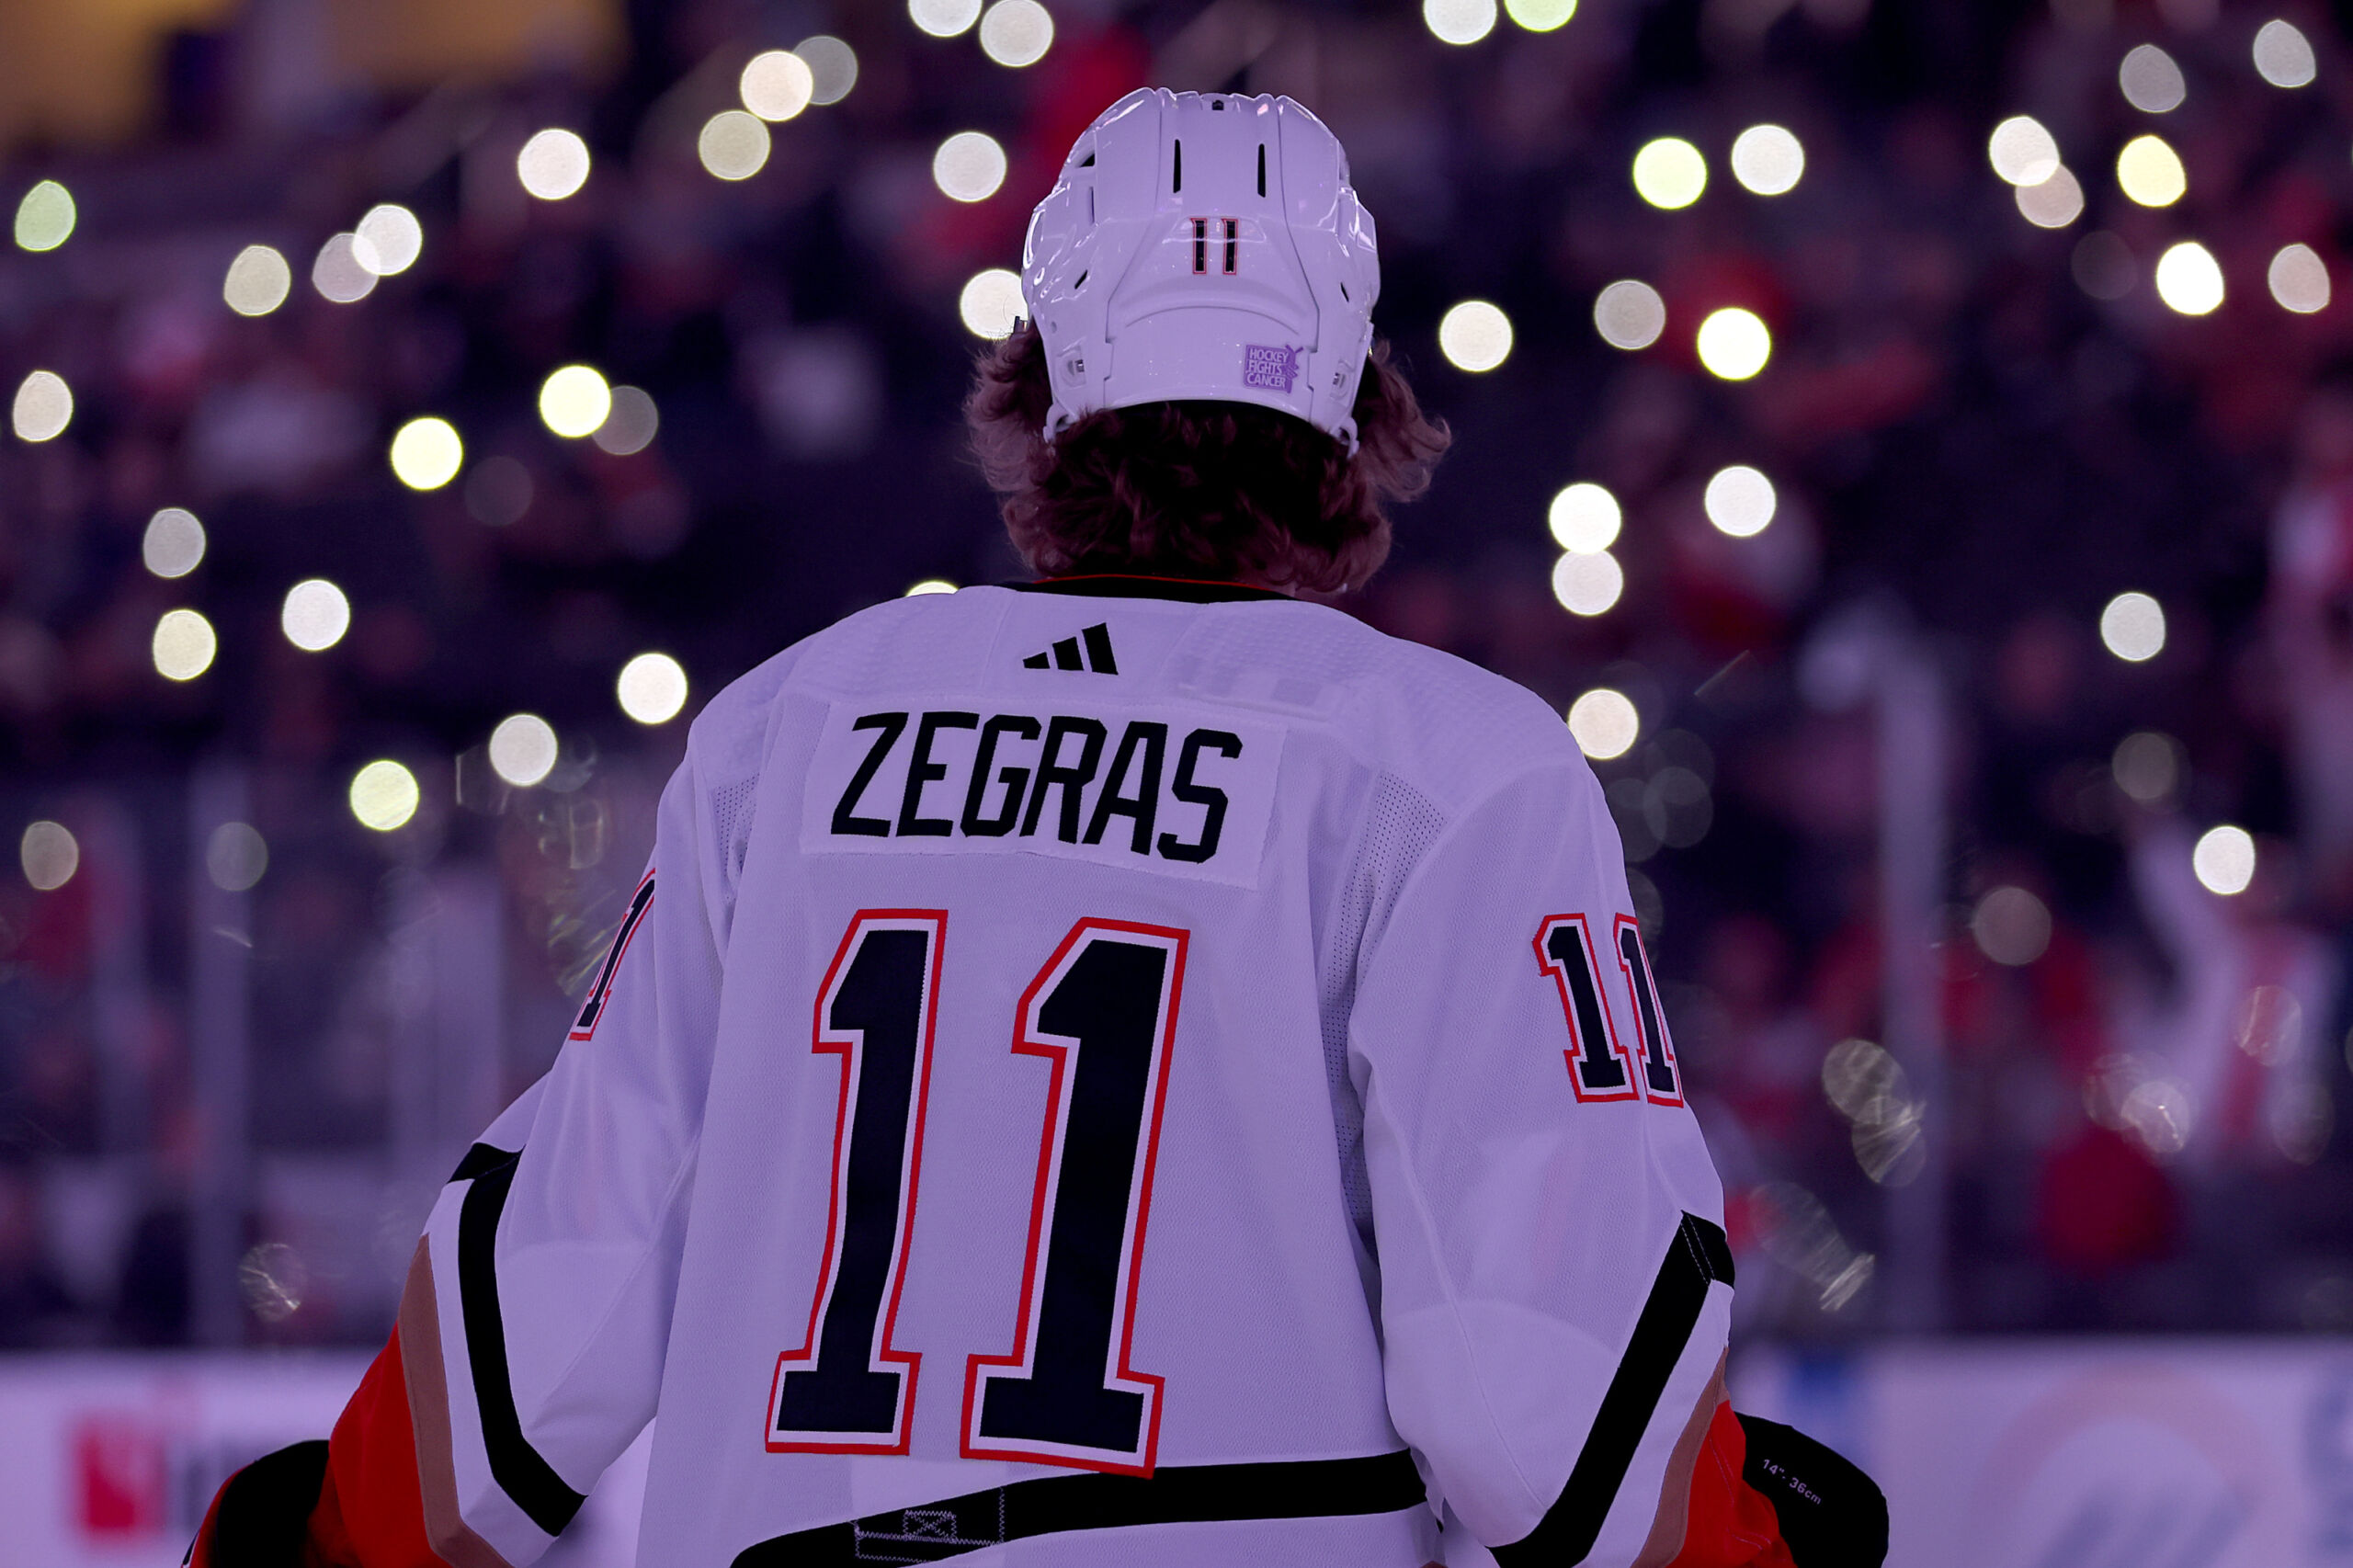 Trevor Zegras, ninth overall pick by the Anaheim Ducks, stands for a  News Photo - Getty Images